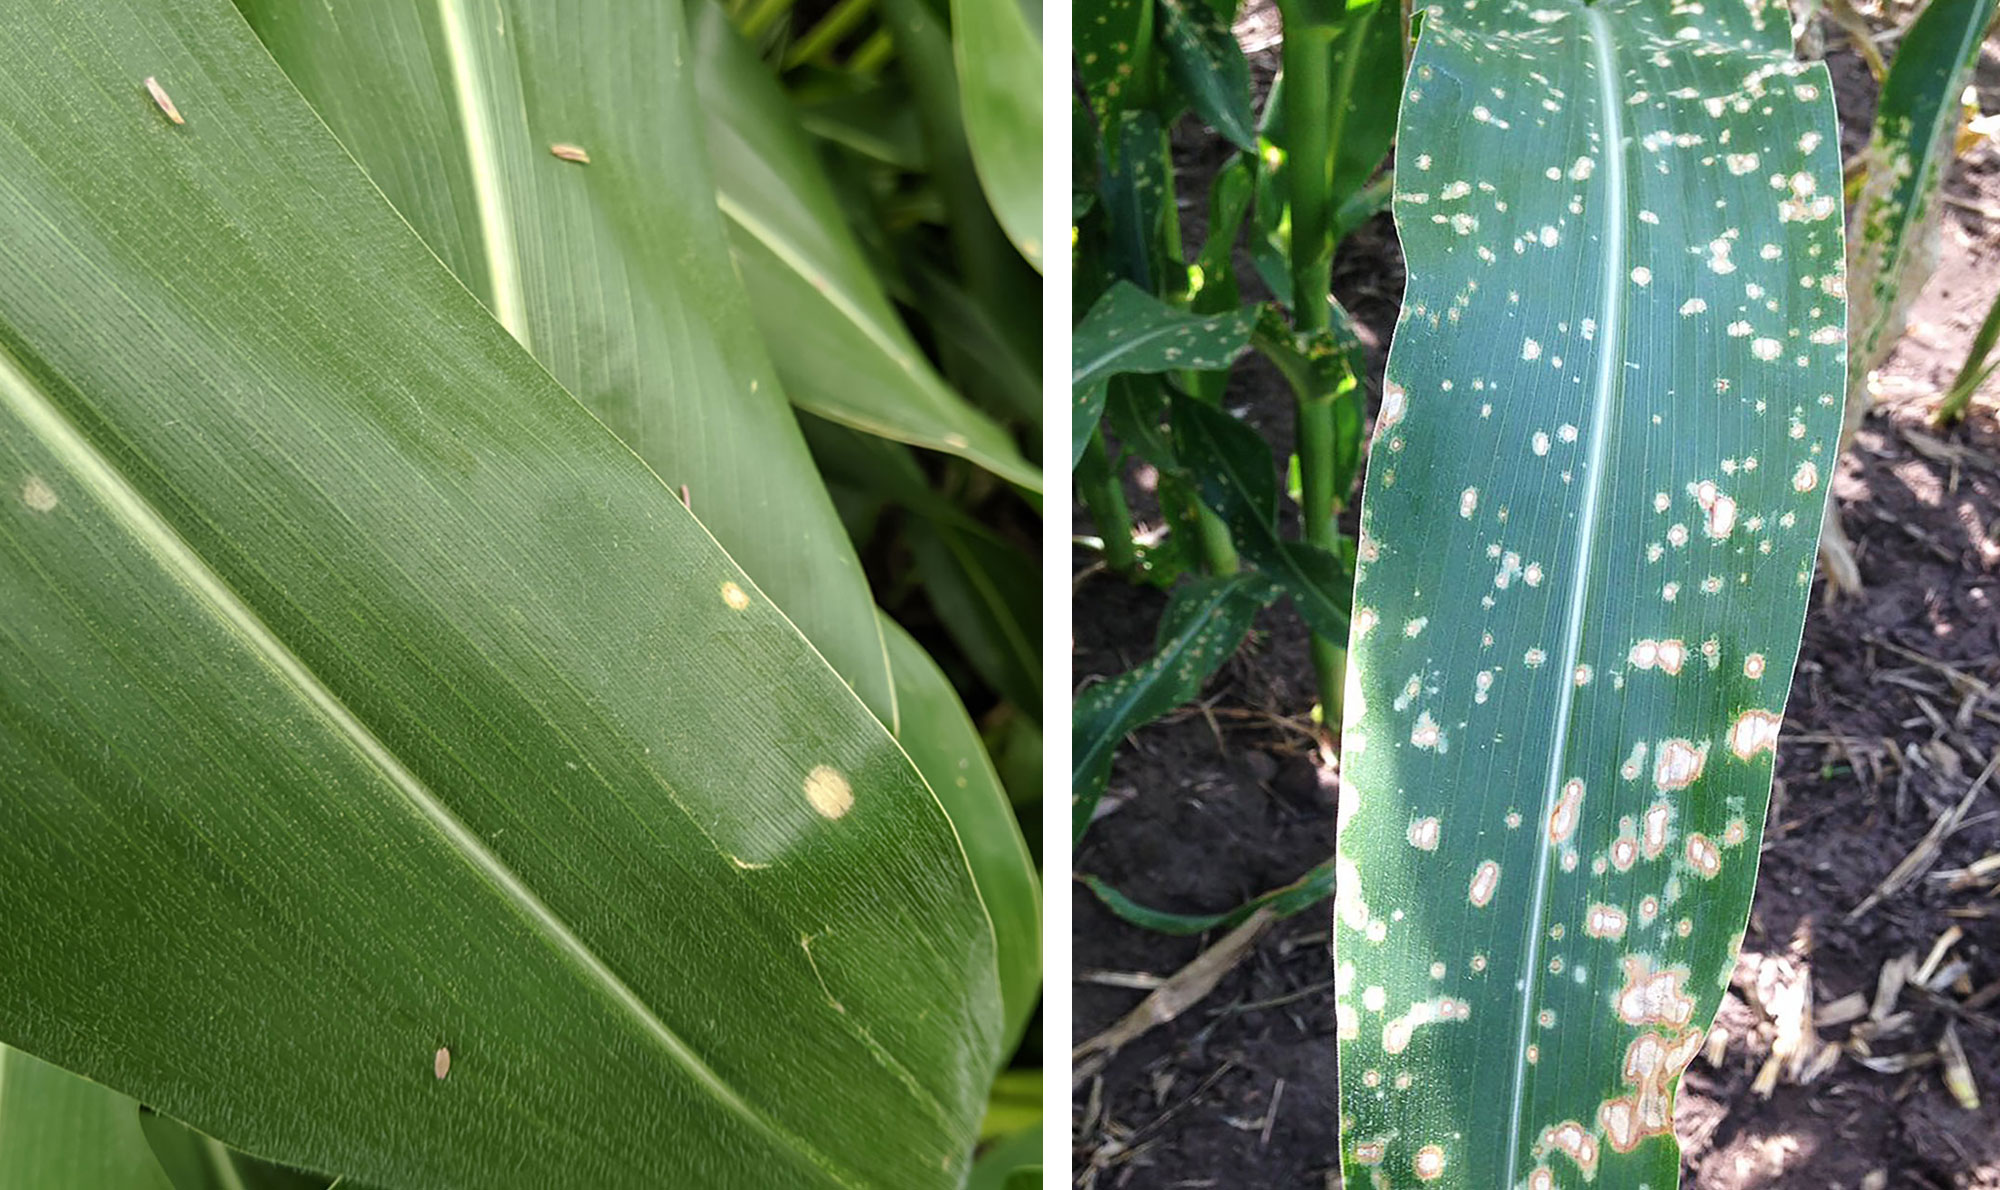 Two corn diseases displayed side-by-side. The left corn plant has holcus spot lesions on its leaves. The right has paraquat drift injury.